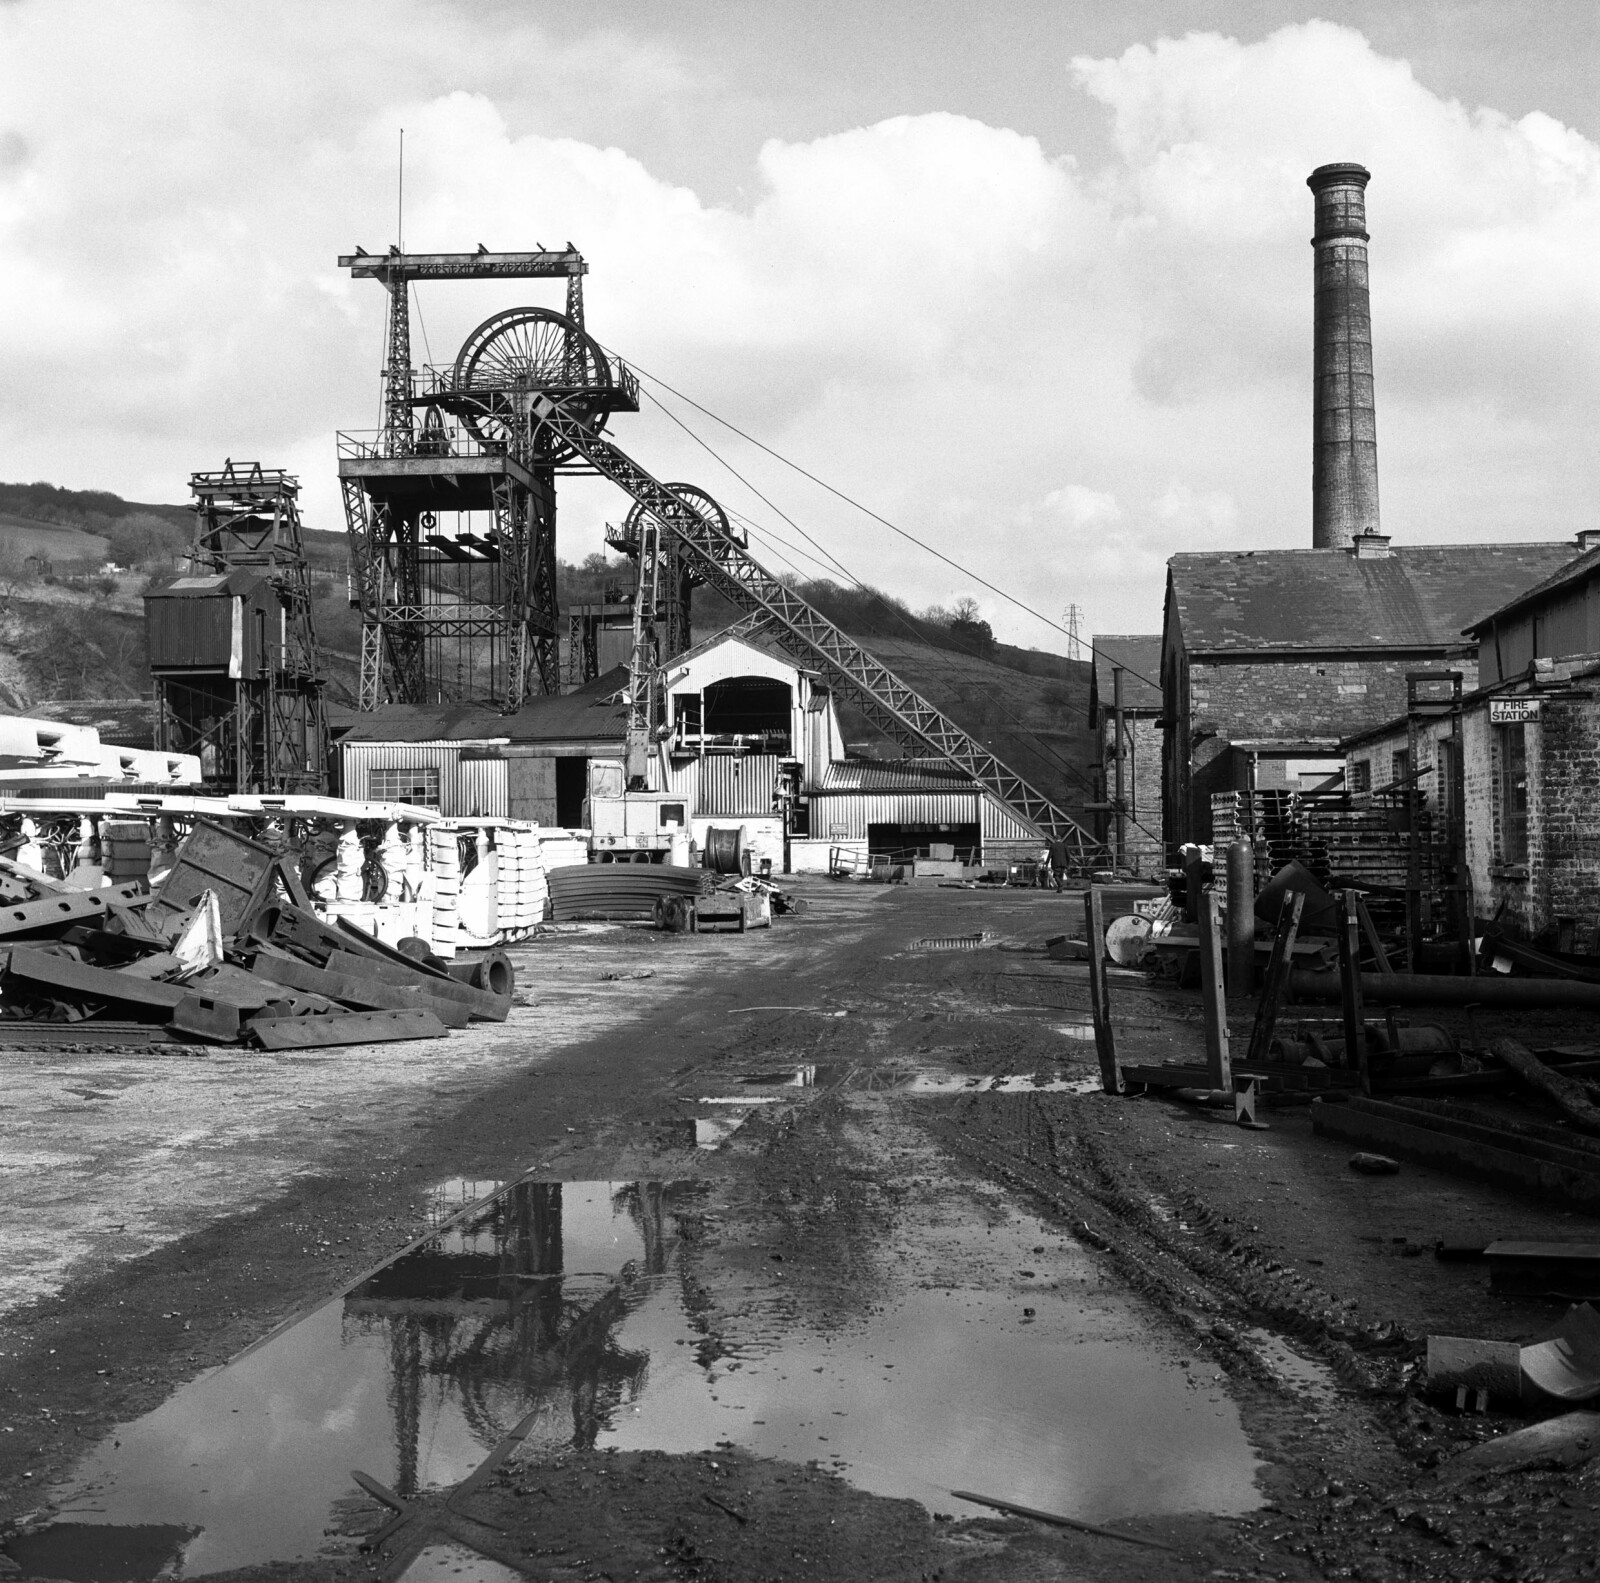 Lewis Merthyr Colliery, 1977, hydraulic roof supports in the yard waiting to be taken underground.